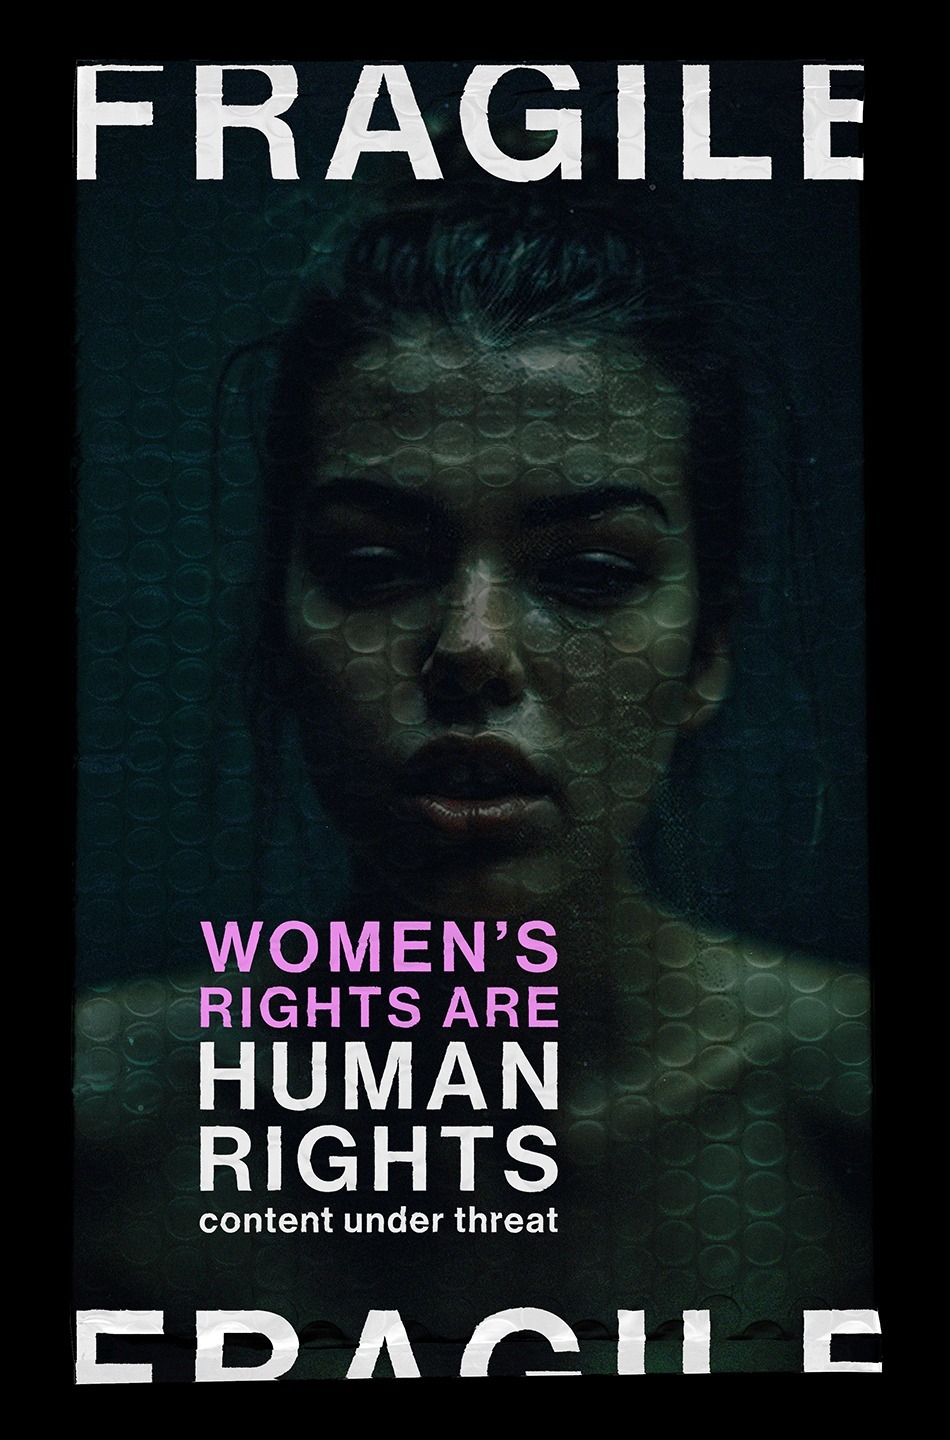 VISUAL DIARY1 - FRAGILE Women's Rights